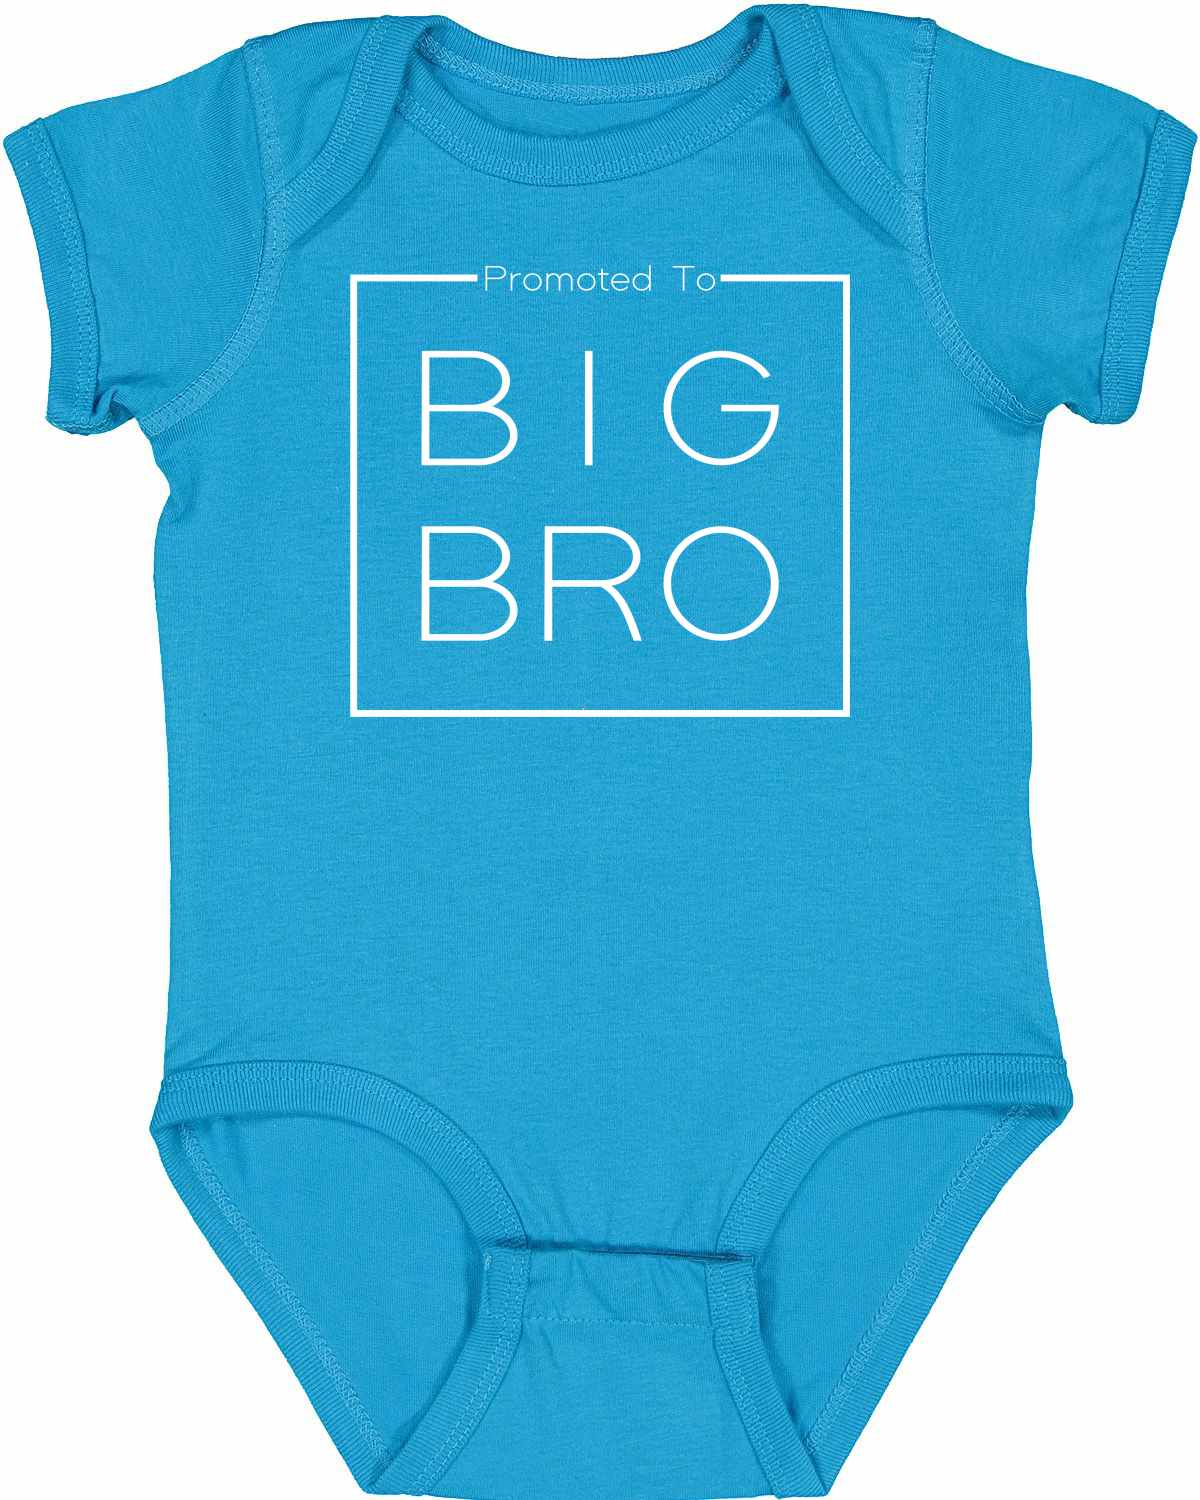 Promoted to Big Bro- Big Brother Box on Infant BodySuit (#1336-10)